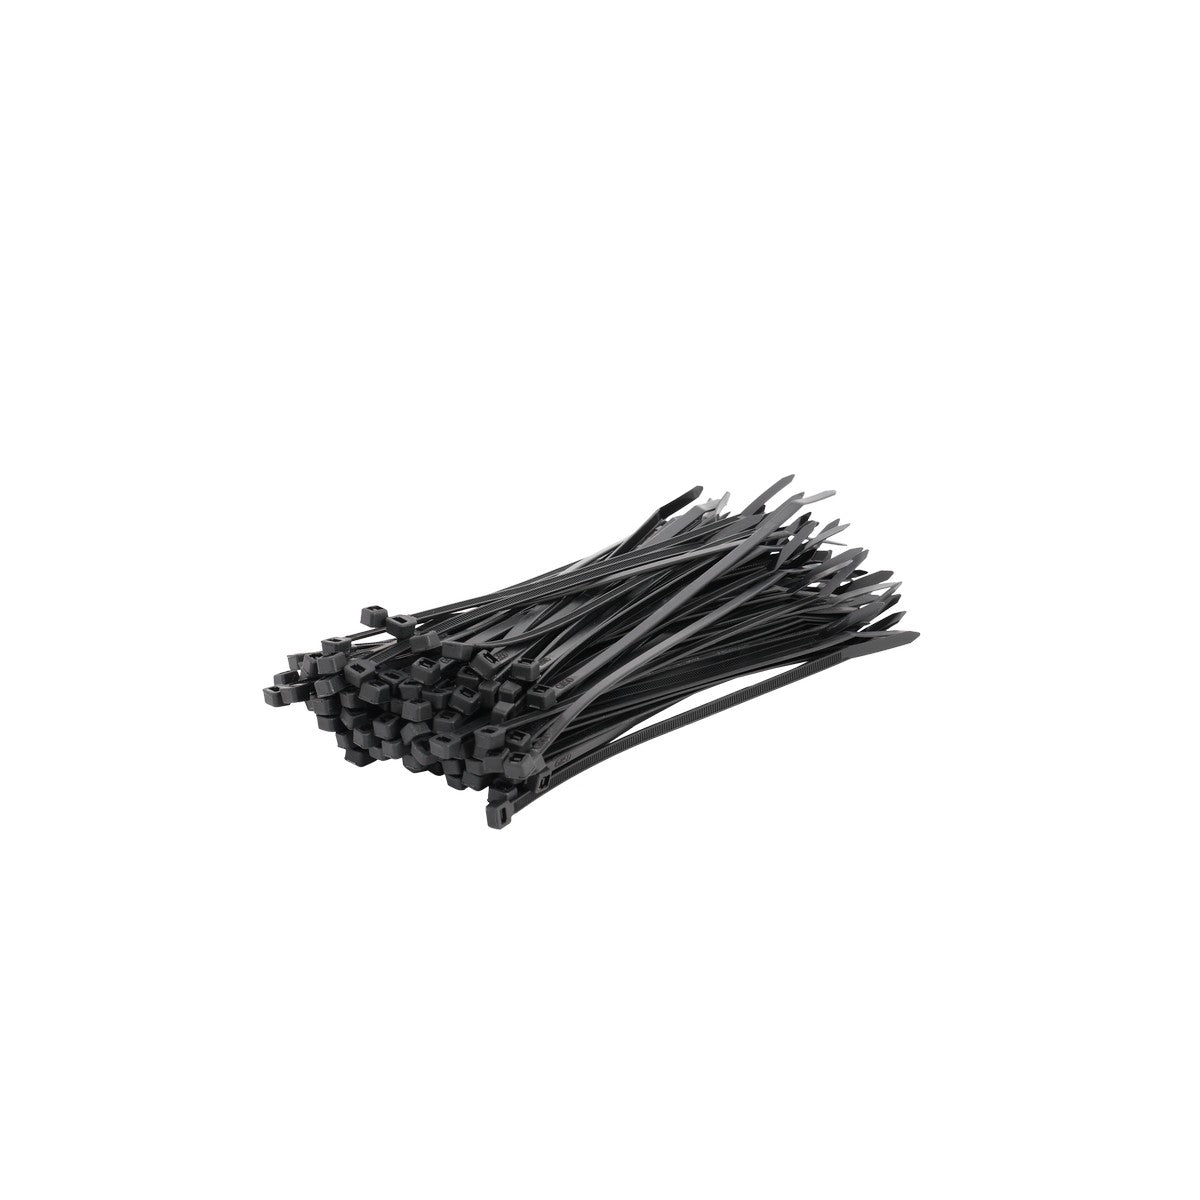 Cable Ties Black - 200 mm x 4.8 mm